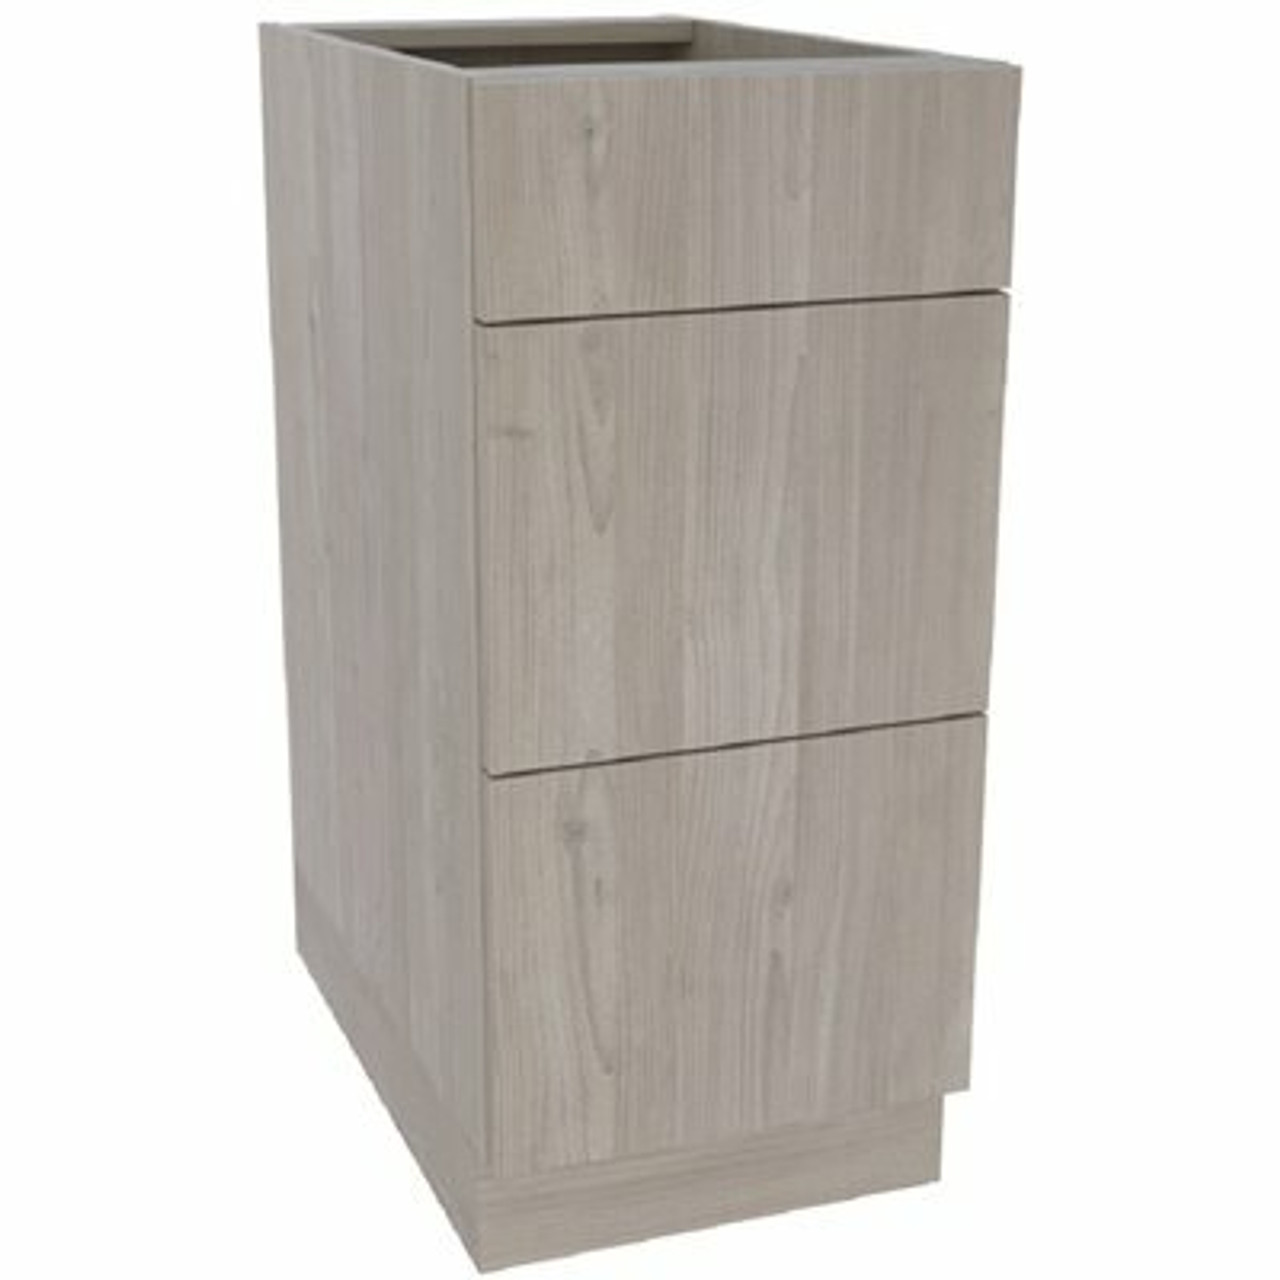 Cambridge Ready To Assemble Threespine 18 In. X 34.5 In. X 24 In. Stock Drawer Base Cabinet In Grey Nordic